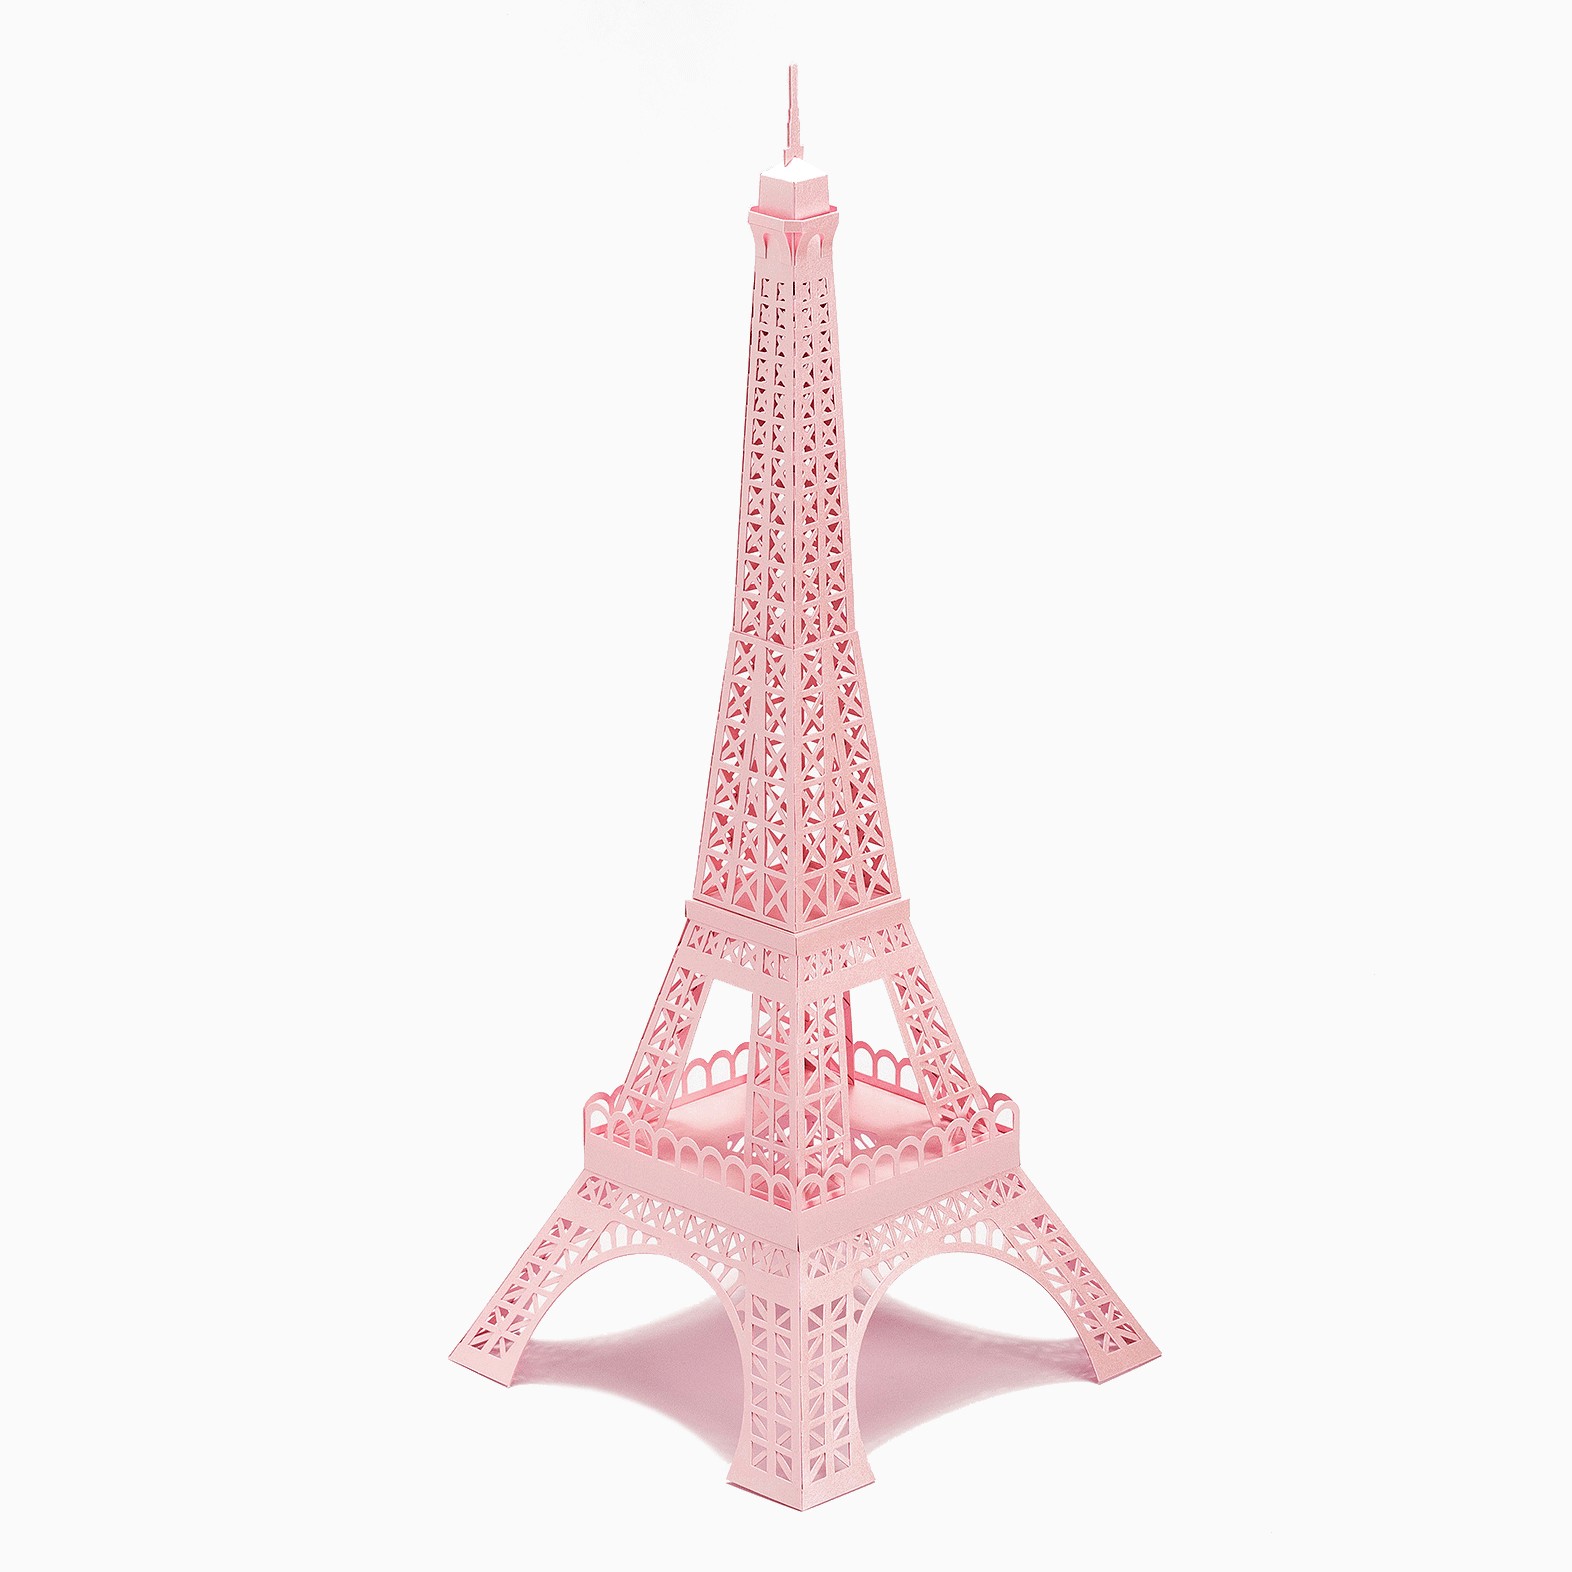 Paris Eiffel Tower in Pink Architectural Model by PaperLandmarks